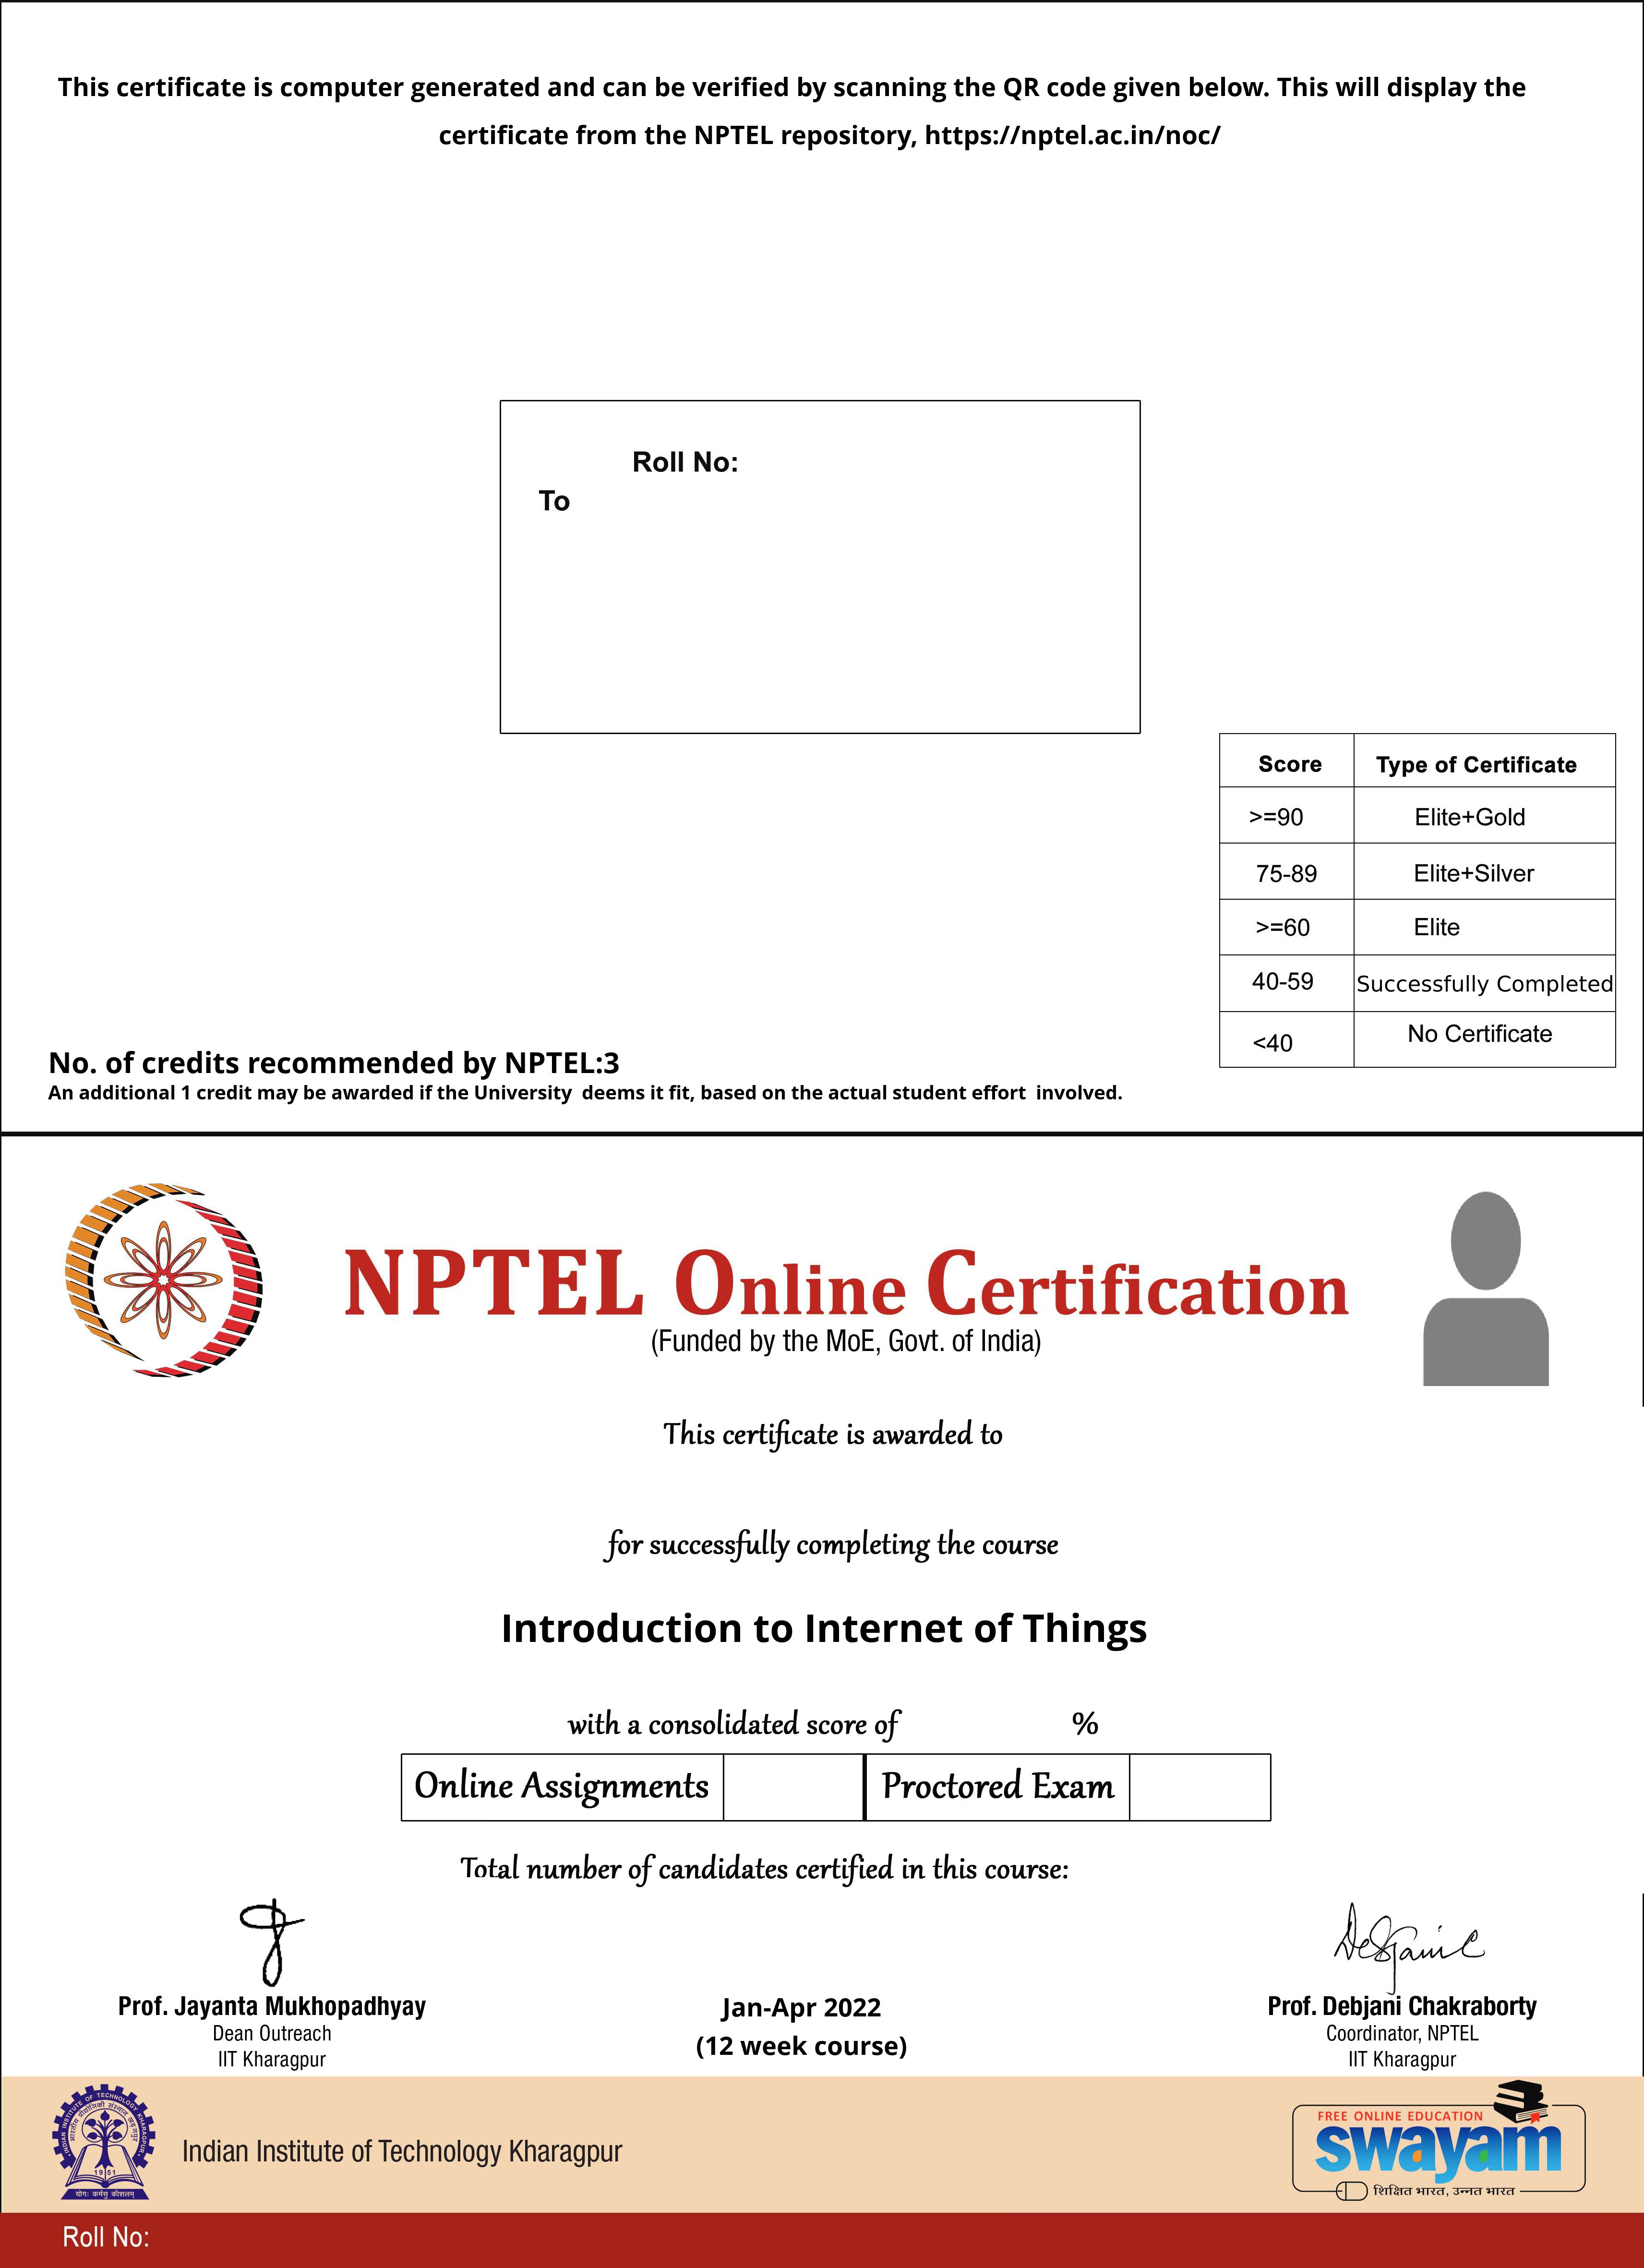 nptel introduction to internet of things assignment answers 2022